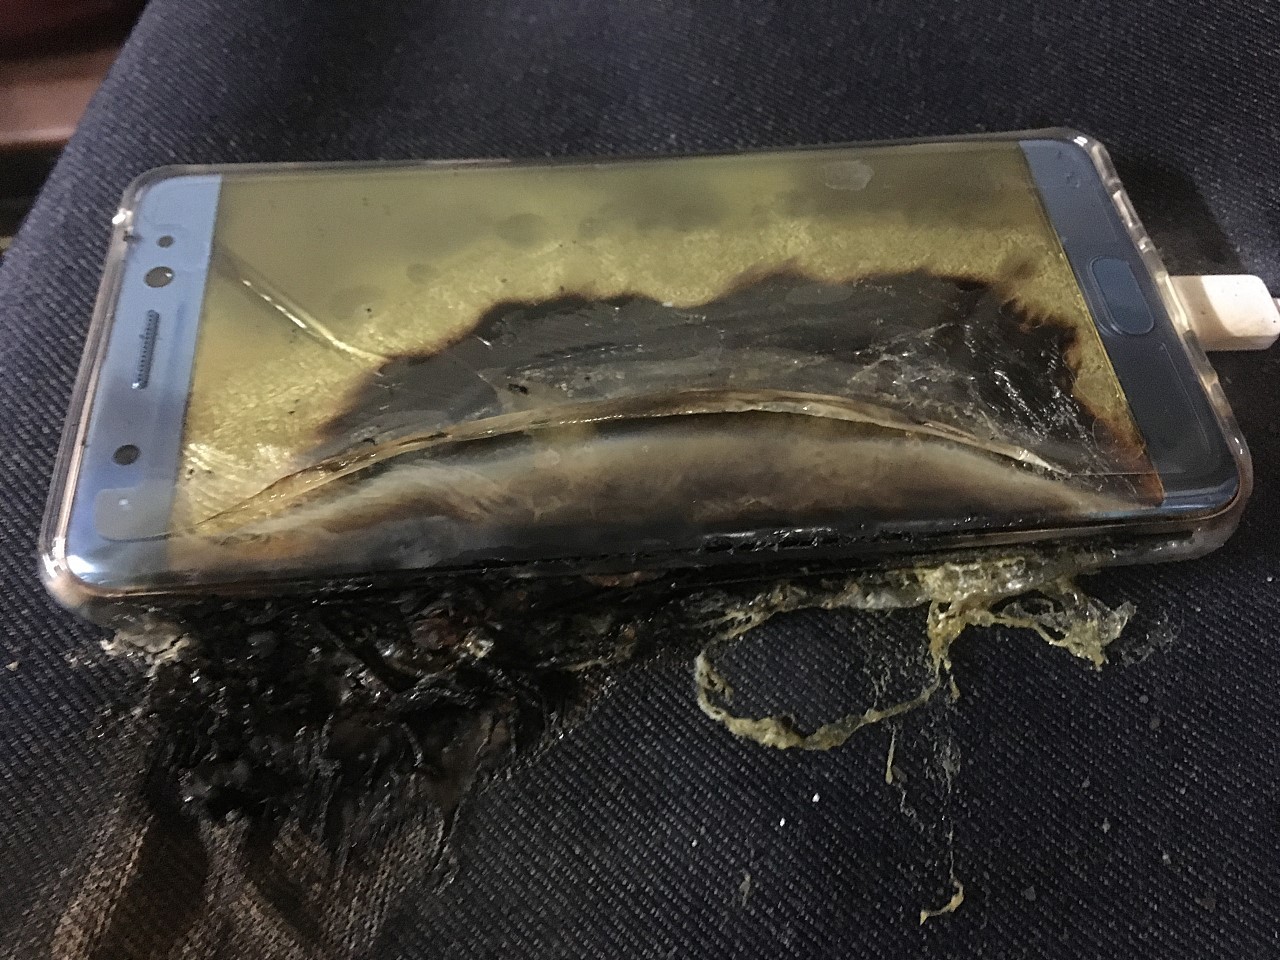 explosive-start-for-samsung-galaxy-note-7-more-phones-catch-fire-while-charging-507793-4.jpg